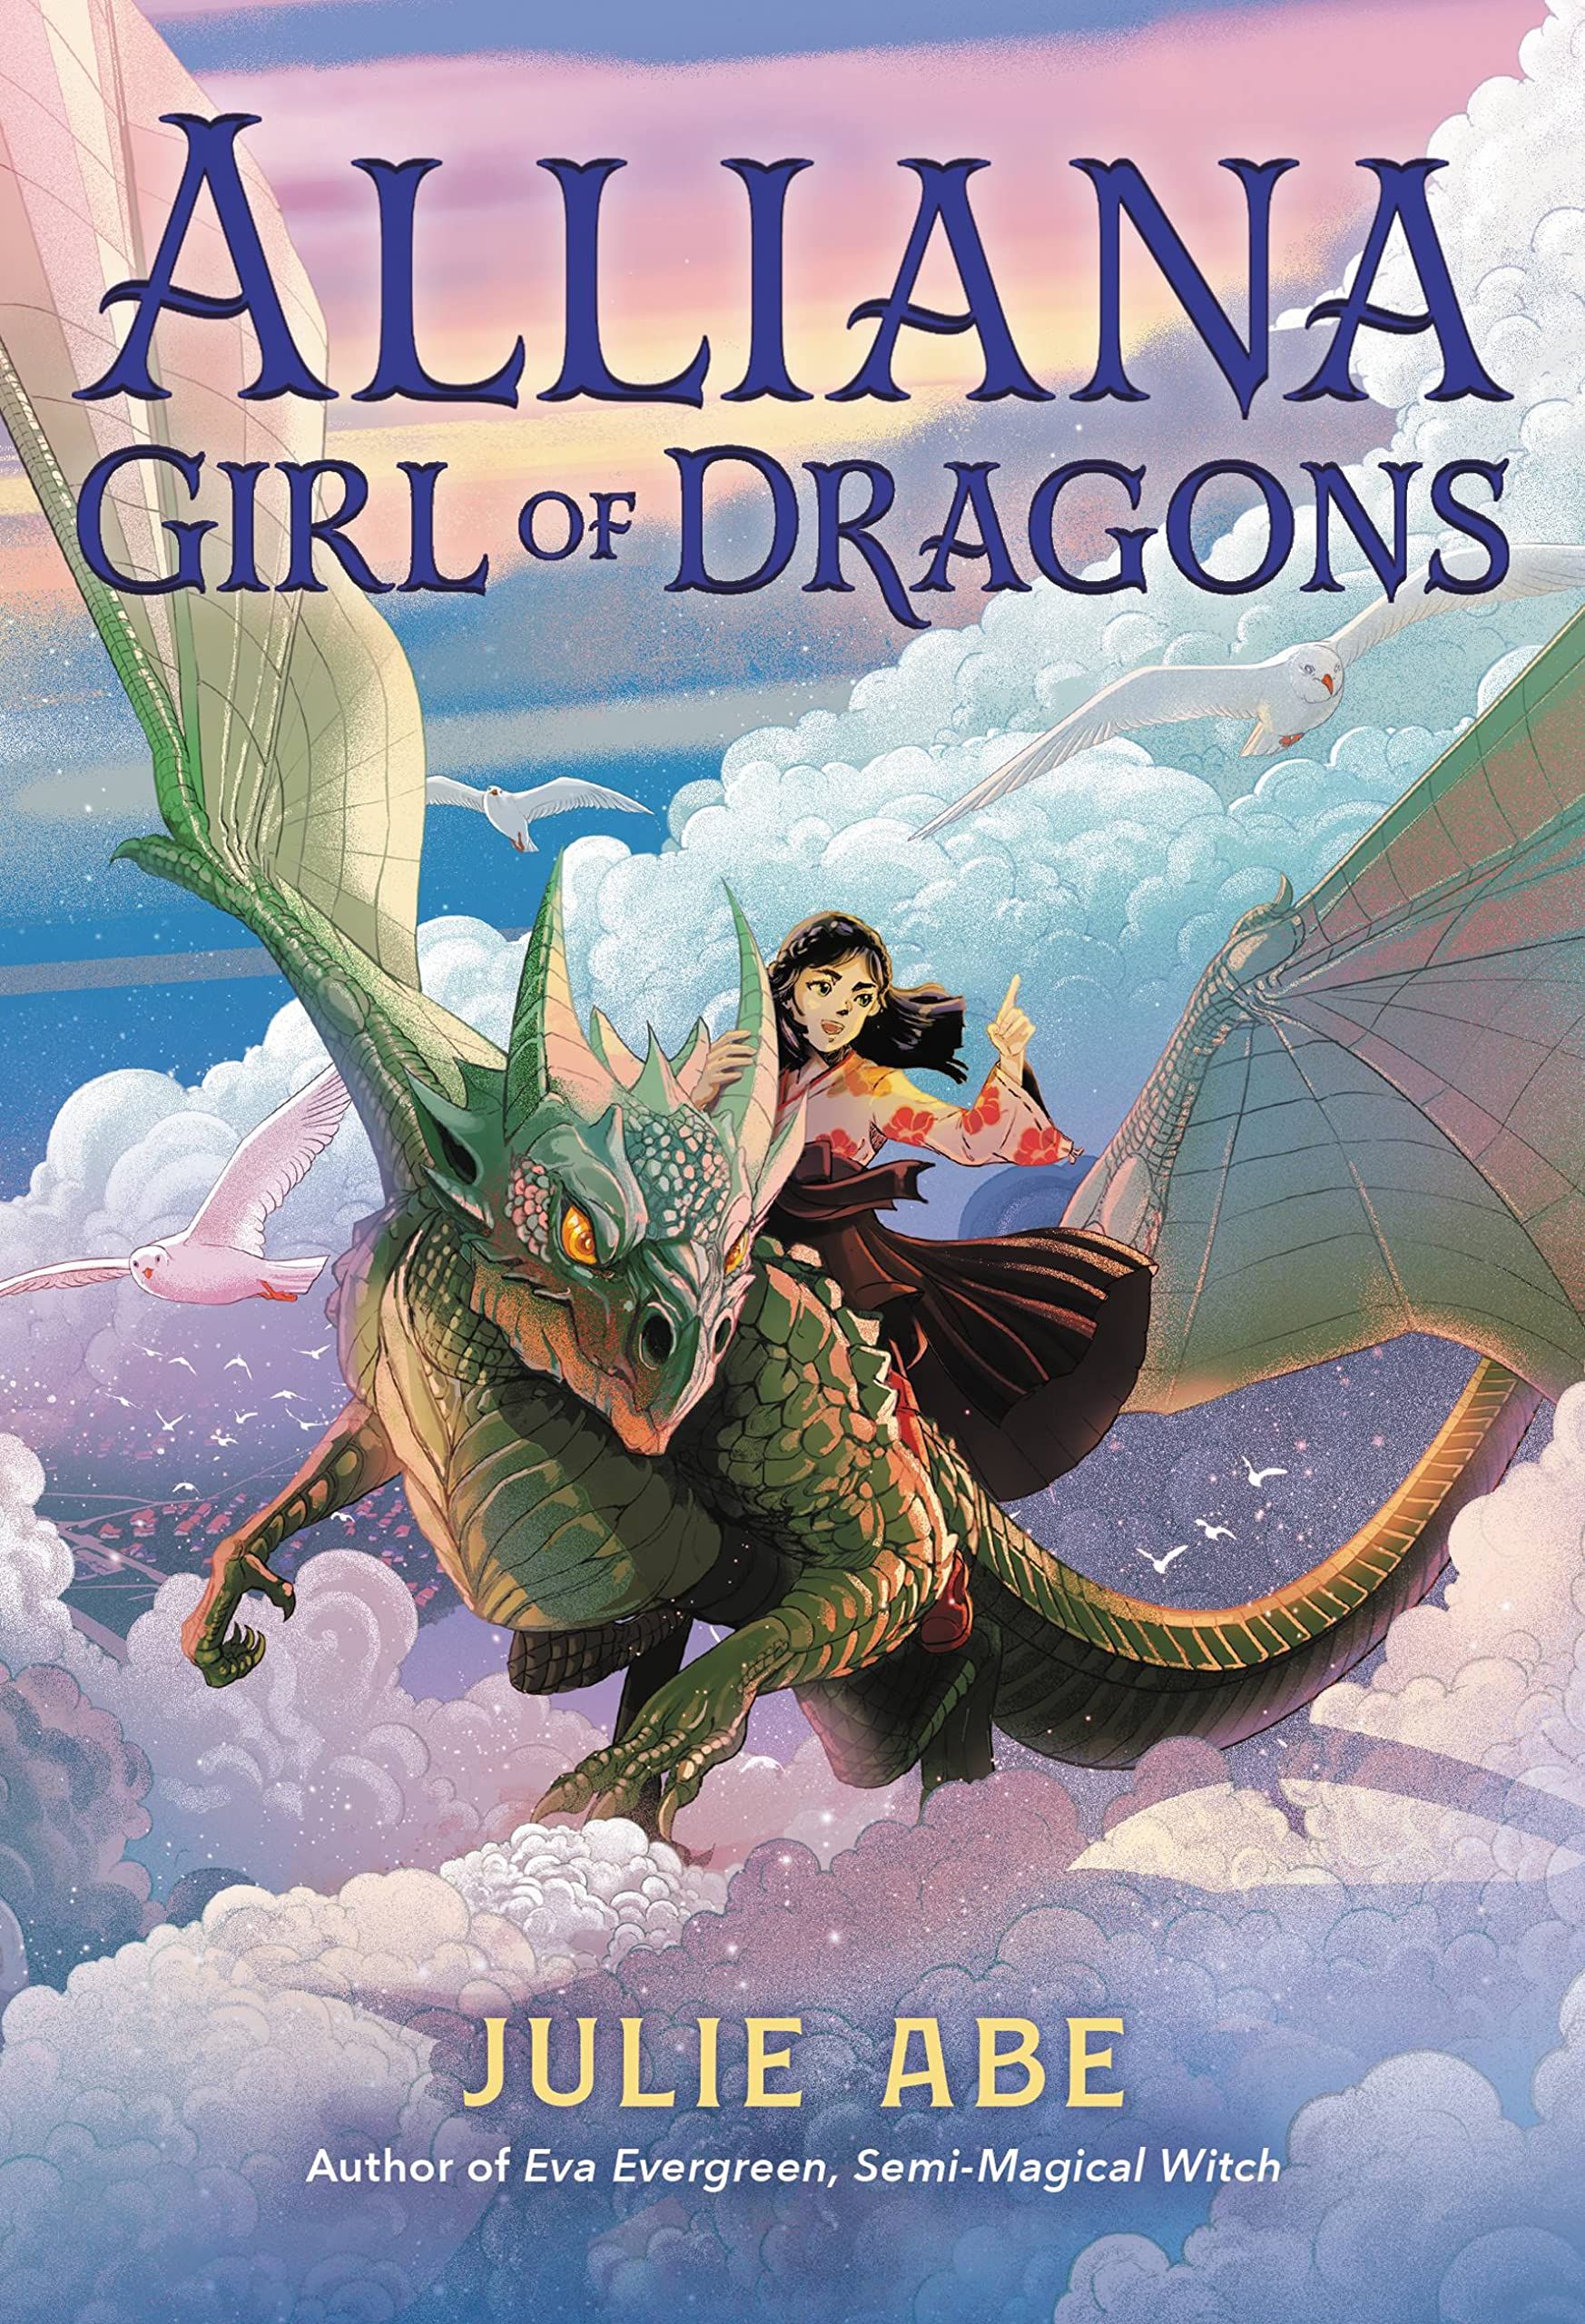 Cover image of Alliana, Girl of Dragons by Julie Abe.